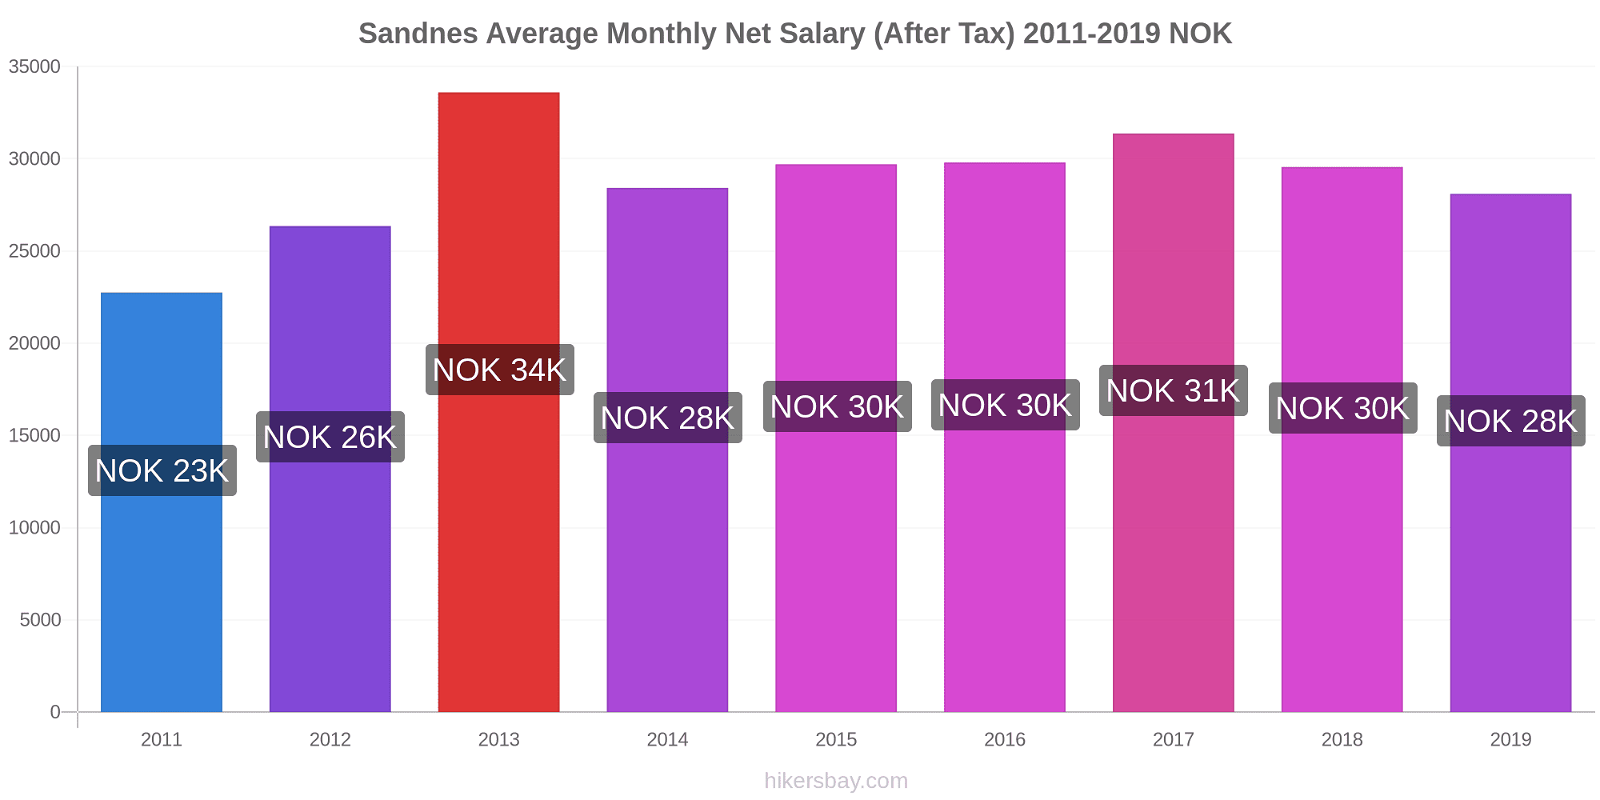 Sandnes price changes Average Monthly Net Salary (After Tax) hikersbay.com